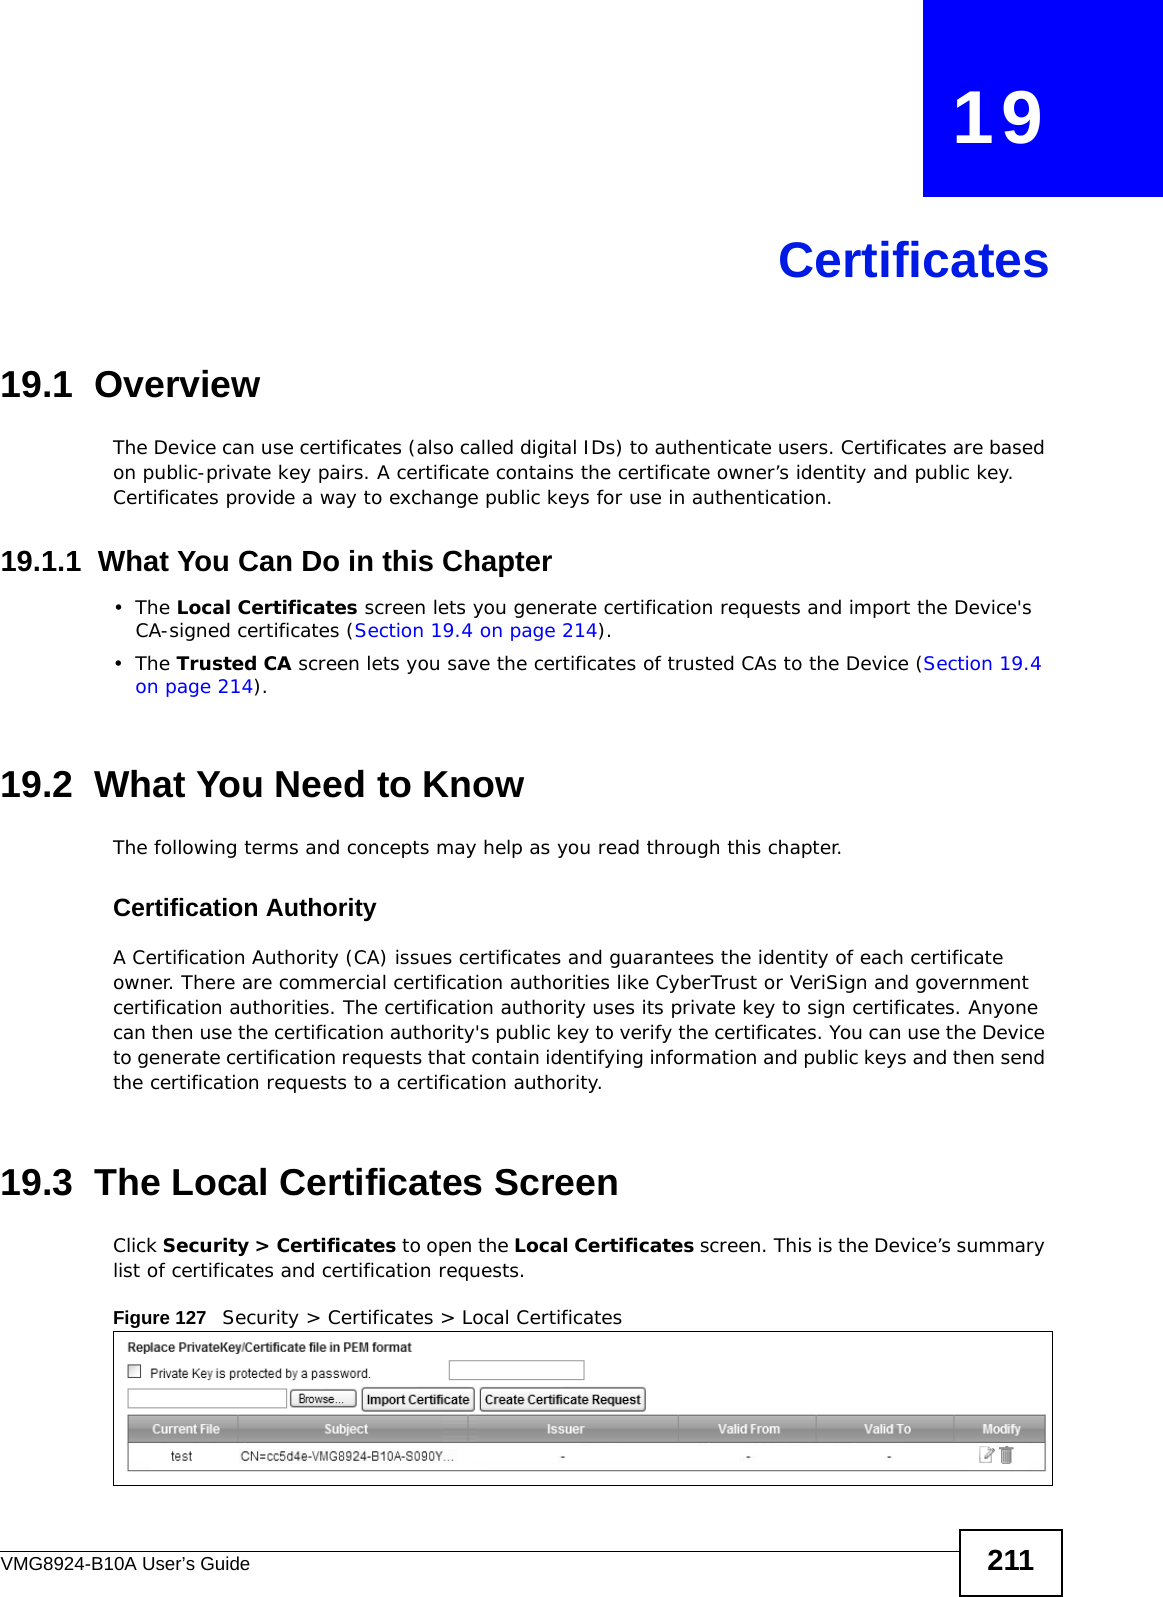 VMG8924-B10A User’s Guide 211CHAPTER   19Certificates19.1  OverviewThe Device can use certificates (also called digital IDs) to authenticate users. Certificates are based on public-private key pairs. A certificate contains the certificate owner’s identity and public key. Certificates provide a way to exchange public keys for use in authentication. 19.1.1  What You Can Do in this Chapter•The Local Certificates screen lets you generate certification requests and import the Device&apos;s CA-signed certificates (Section 19.4 on page 214).•The Trusted CA screen lets you save the certificates of trusted CAs to the Device (Section 19.4 on page 214).19.2  What You Need to KnowThe following terms and concepts may help as you read through this chapter.Certification Authority A Certification Authority (CA) issues certificates and guarantees the identity of each certificate owner. There are commercial certification authorities like CyberTrust or VeriSign and government certification authorities. The certification authority uses its private key to sign certificates. Anyone can then use the certification authority&apos;s public key to verify the certificates. You can use the Device to generate certification requests that contain identifying information and public keys and then send the certification requests to a certification authority.19.3  The Local Certificates ScreenClick Security &gt; Certificates to open the Local Certificates screen. This is the Device’s summary list of certificates and certification requests. Figure 127   Security &gt; Certificates &gt; Local Certificates 